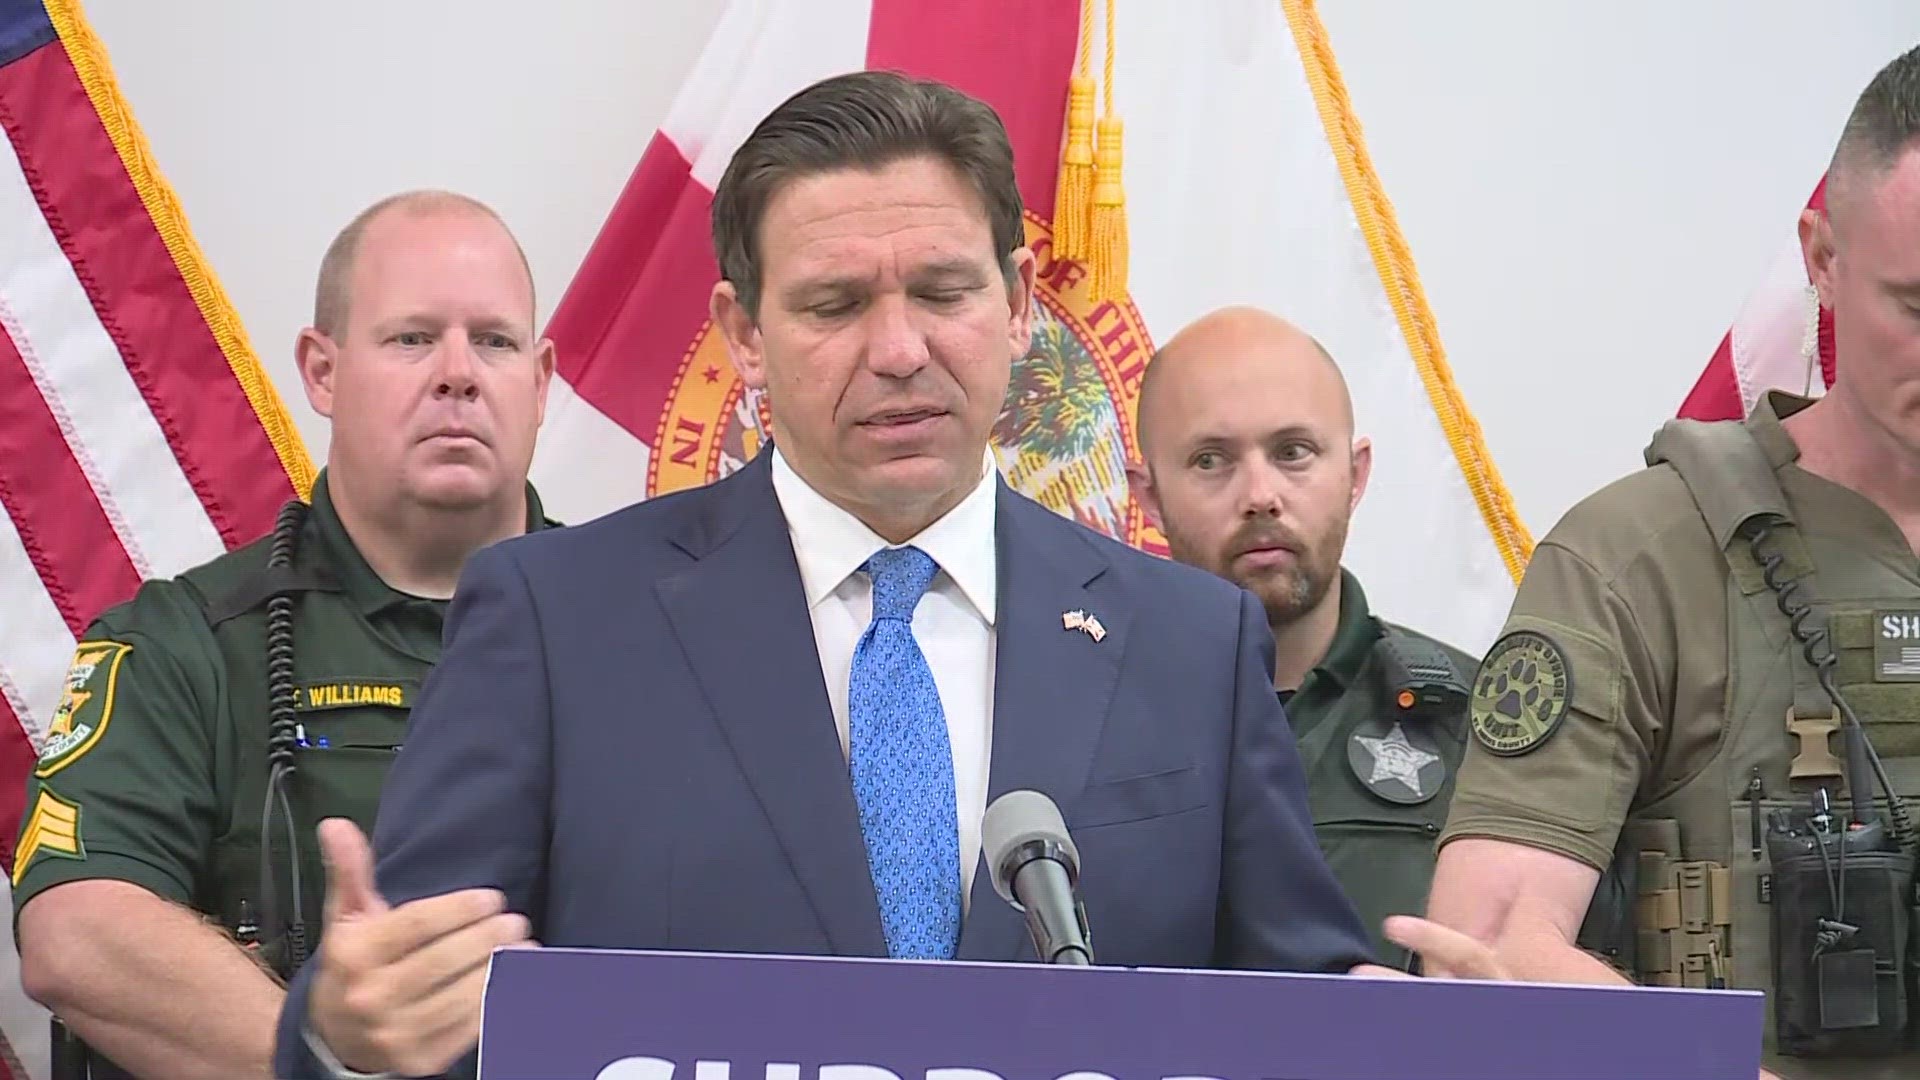 Gov. Ron DeSantis signed two bills Friday in St. Augustine. One allows police to arrest people who "harass" officers. The other prevents civilian review boards.